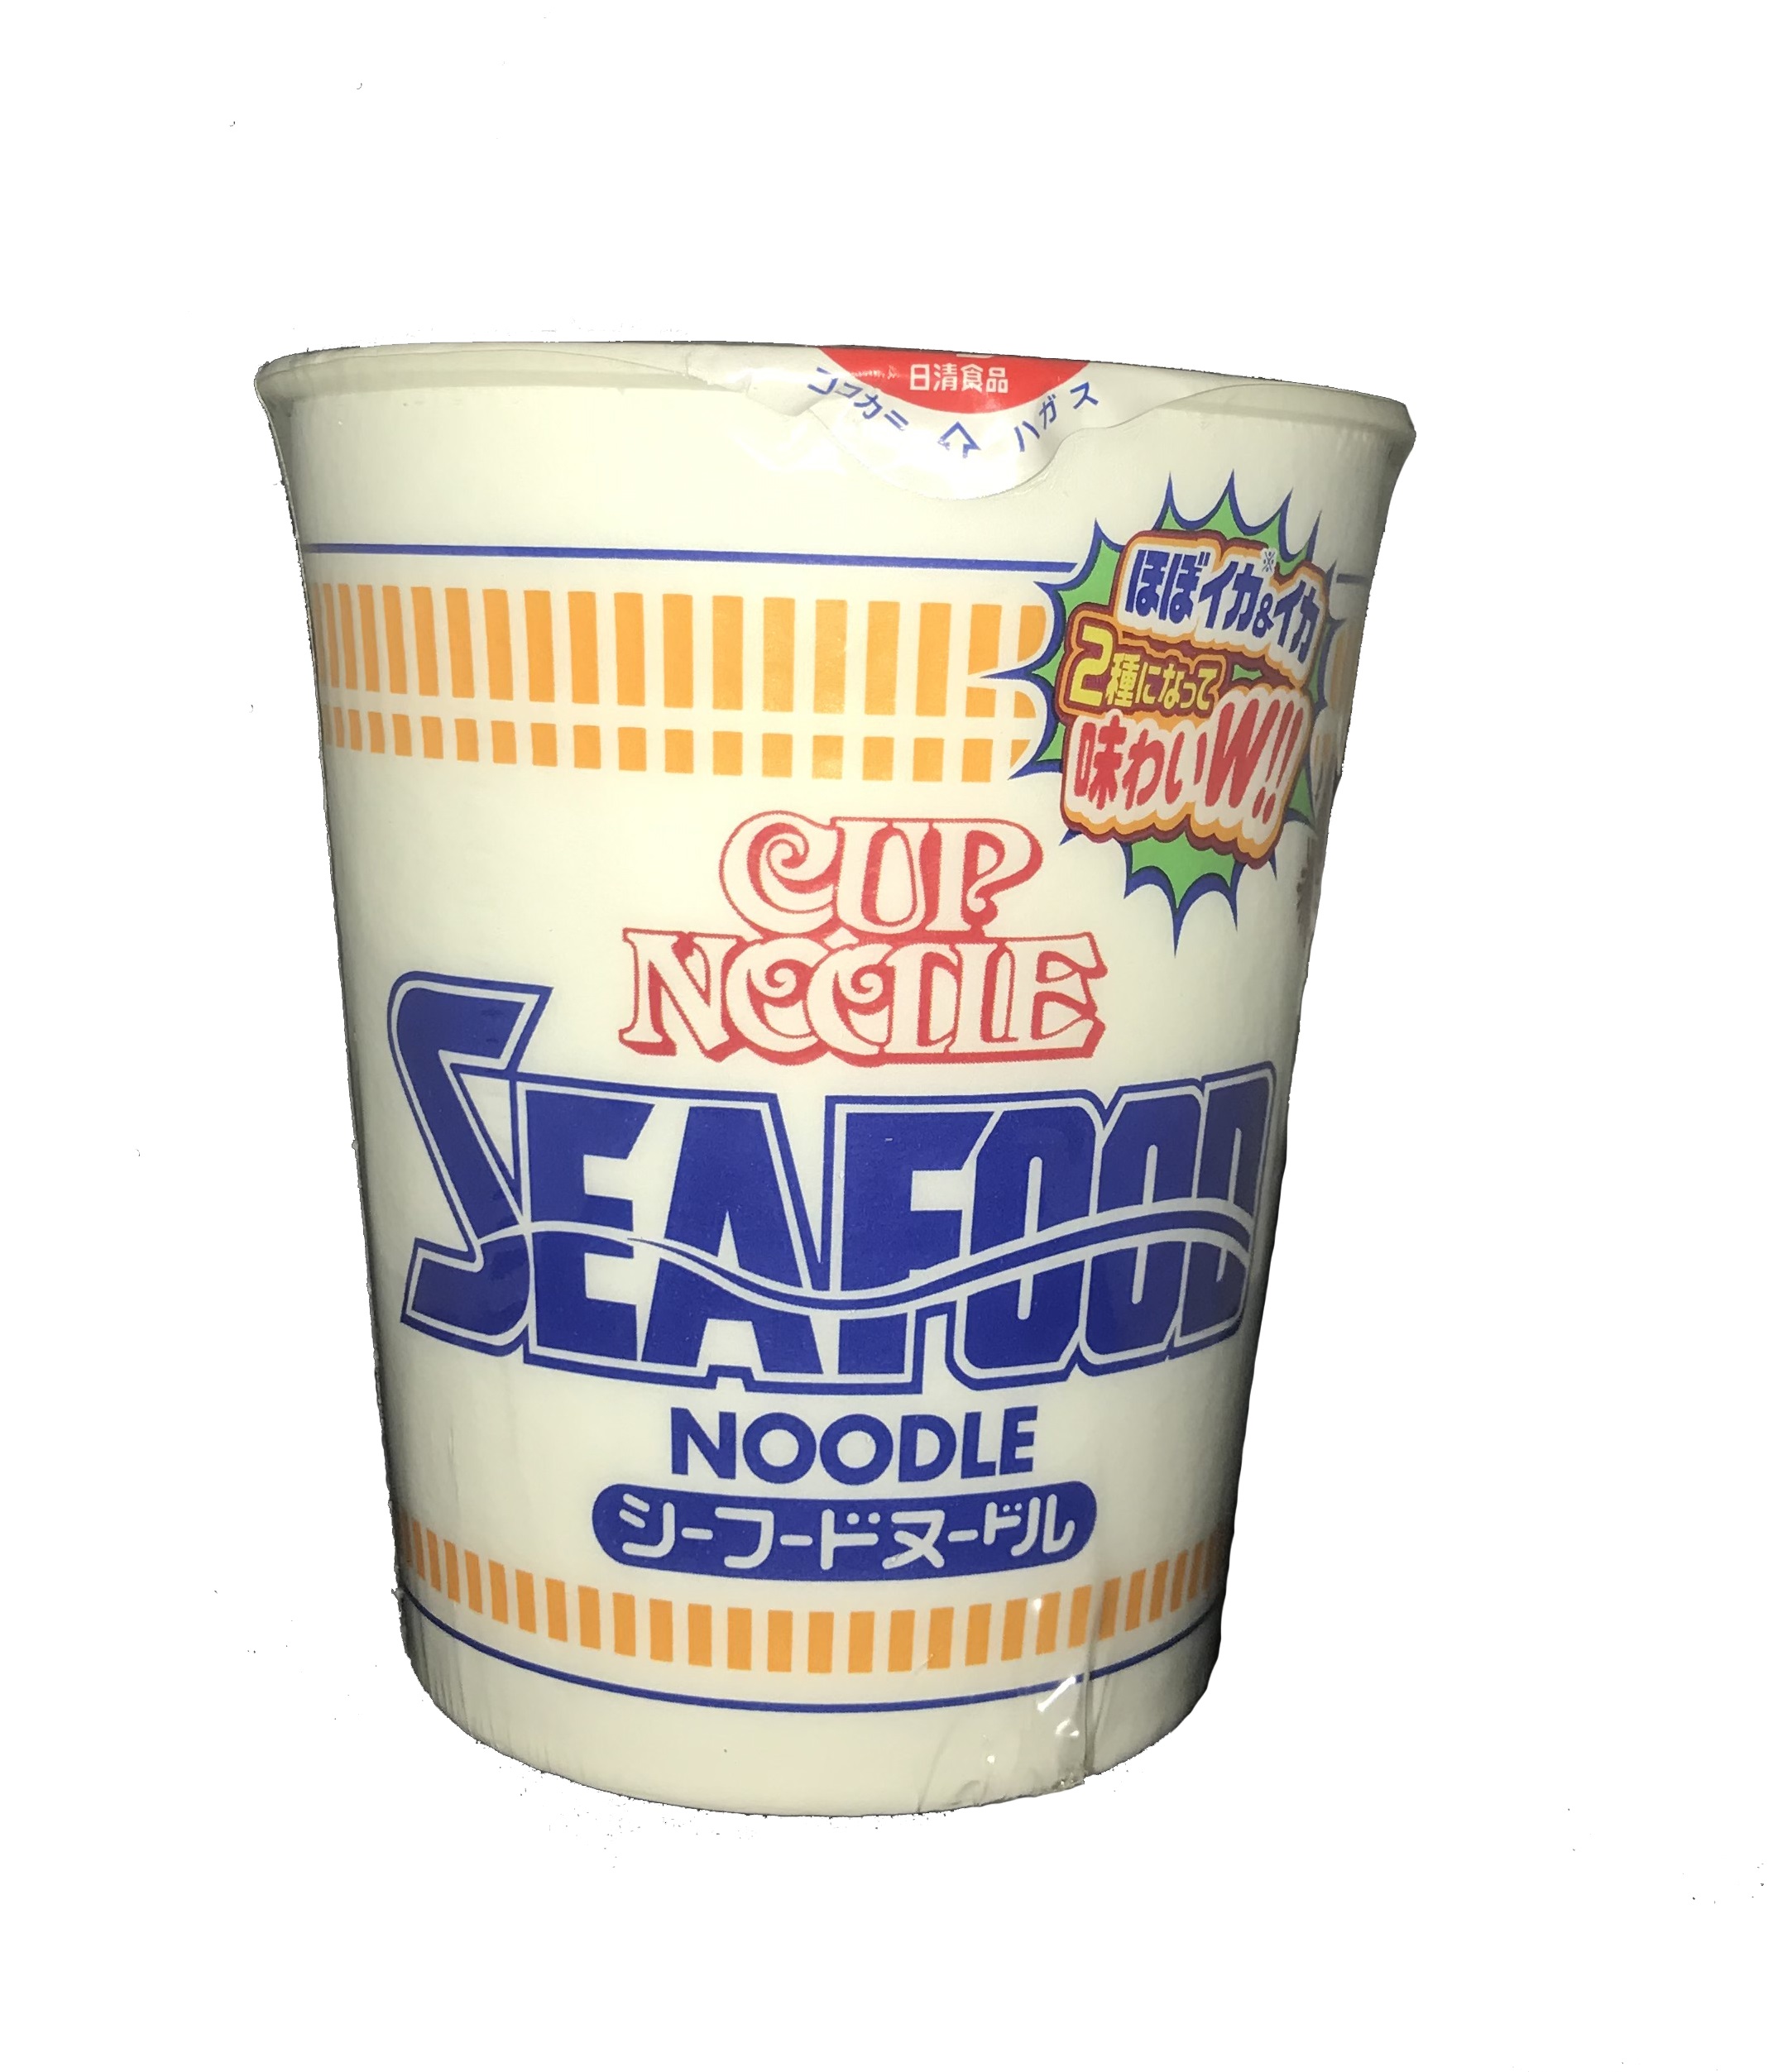 Nissin Cup Noodle SeaFood 75g | Lazada PH